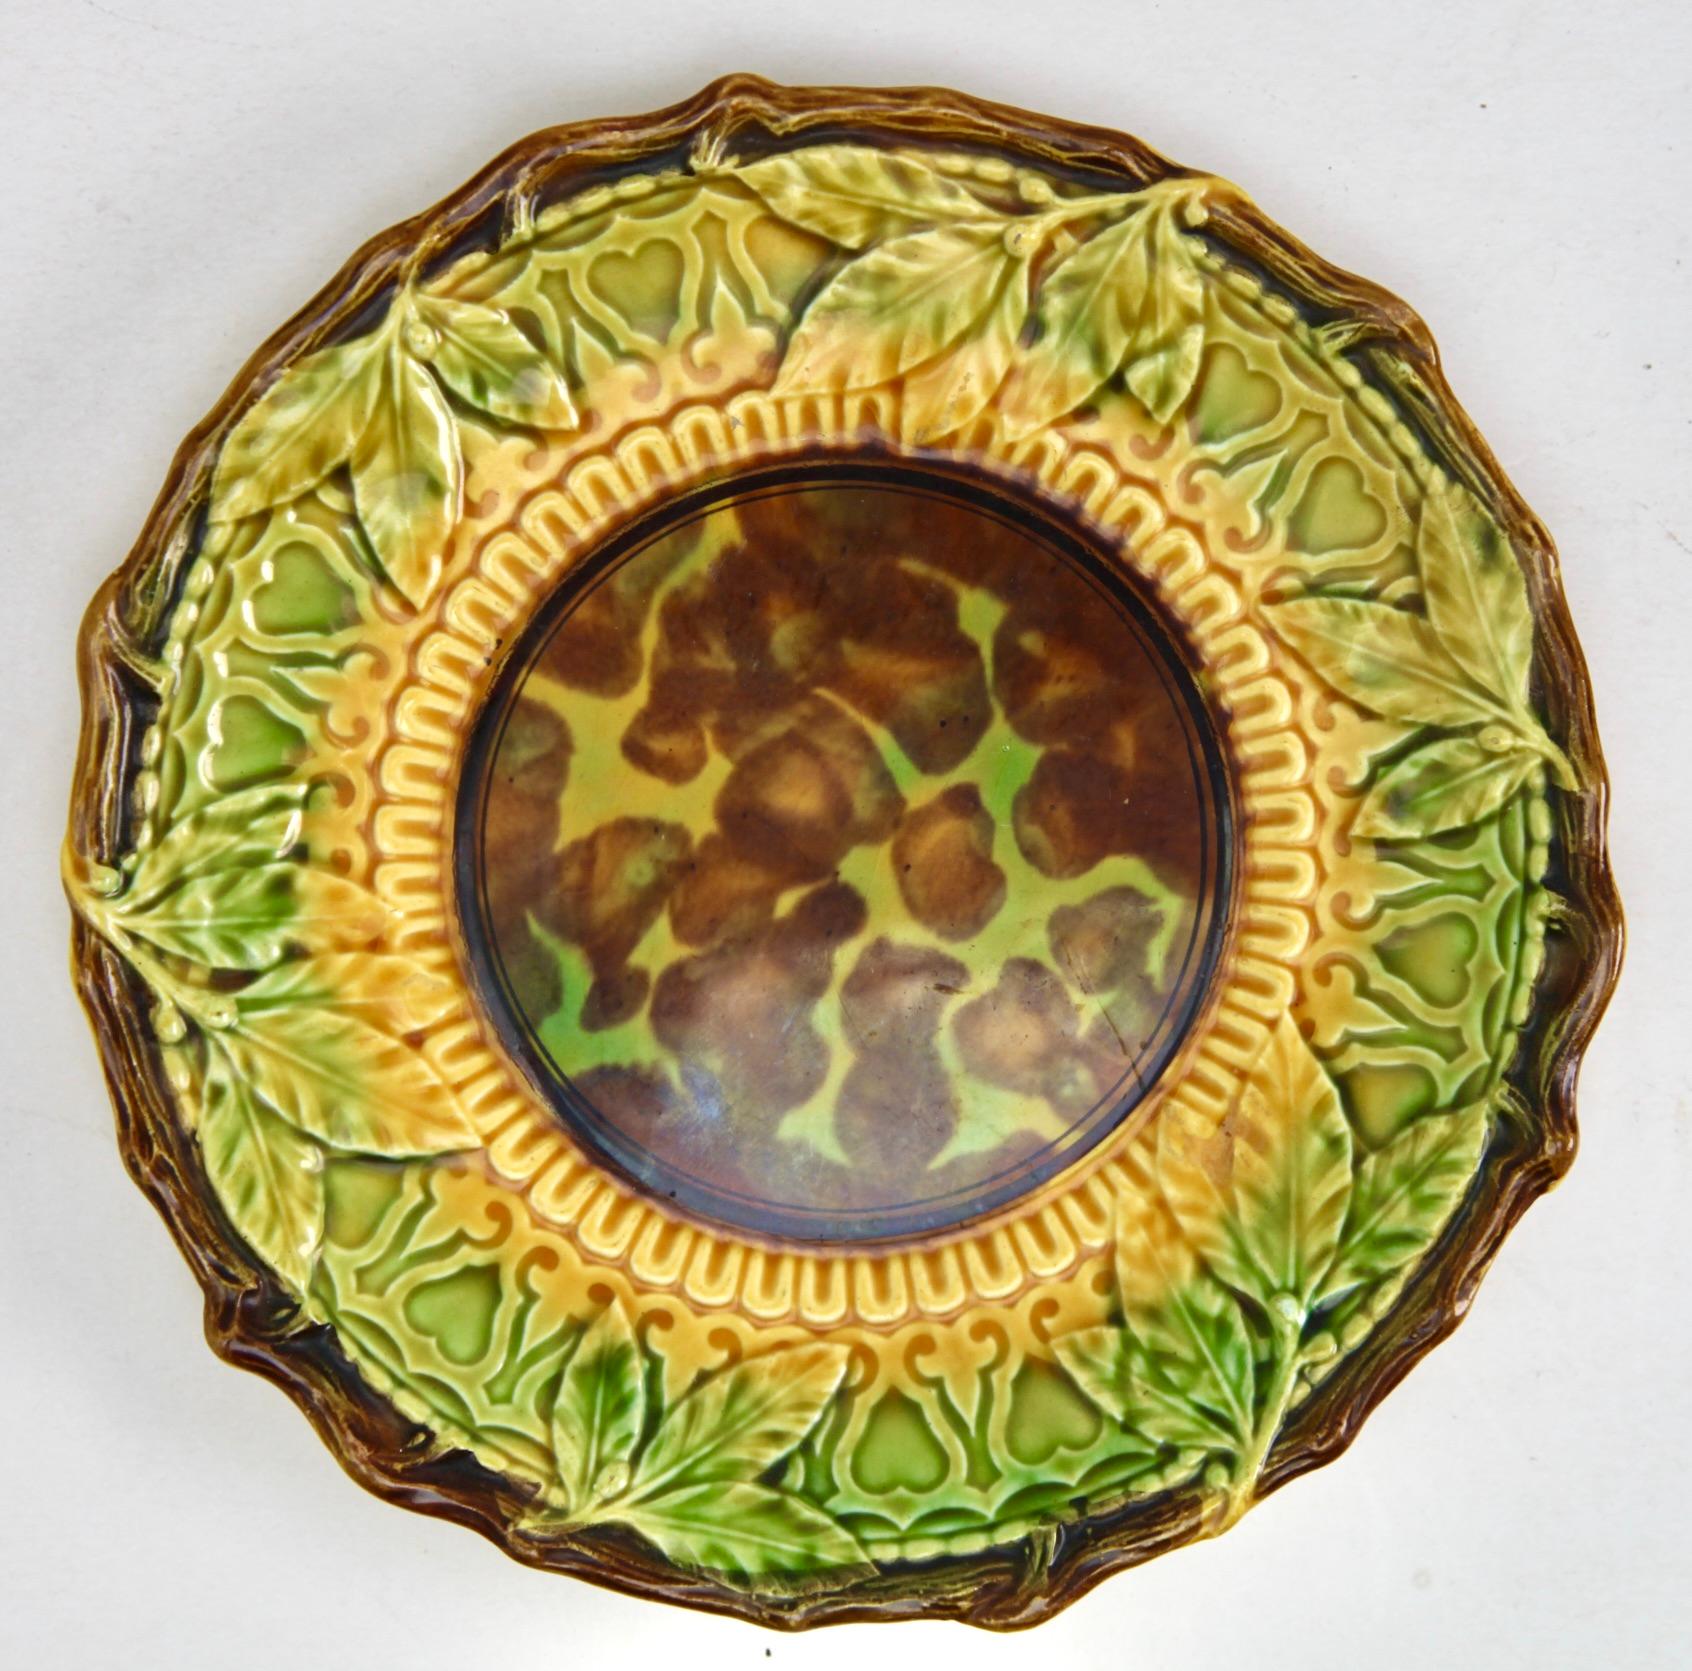 Art Nouveau Majolica glazed tableware set of 9 pieces Leaves pattern in relief.

Sarreguemines Majolica is a type of earthenware, decorated with colored lead glazes. 
Victorian Majolica was made between 1849 and 1900.

Measure: 9 plates diameter